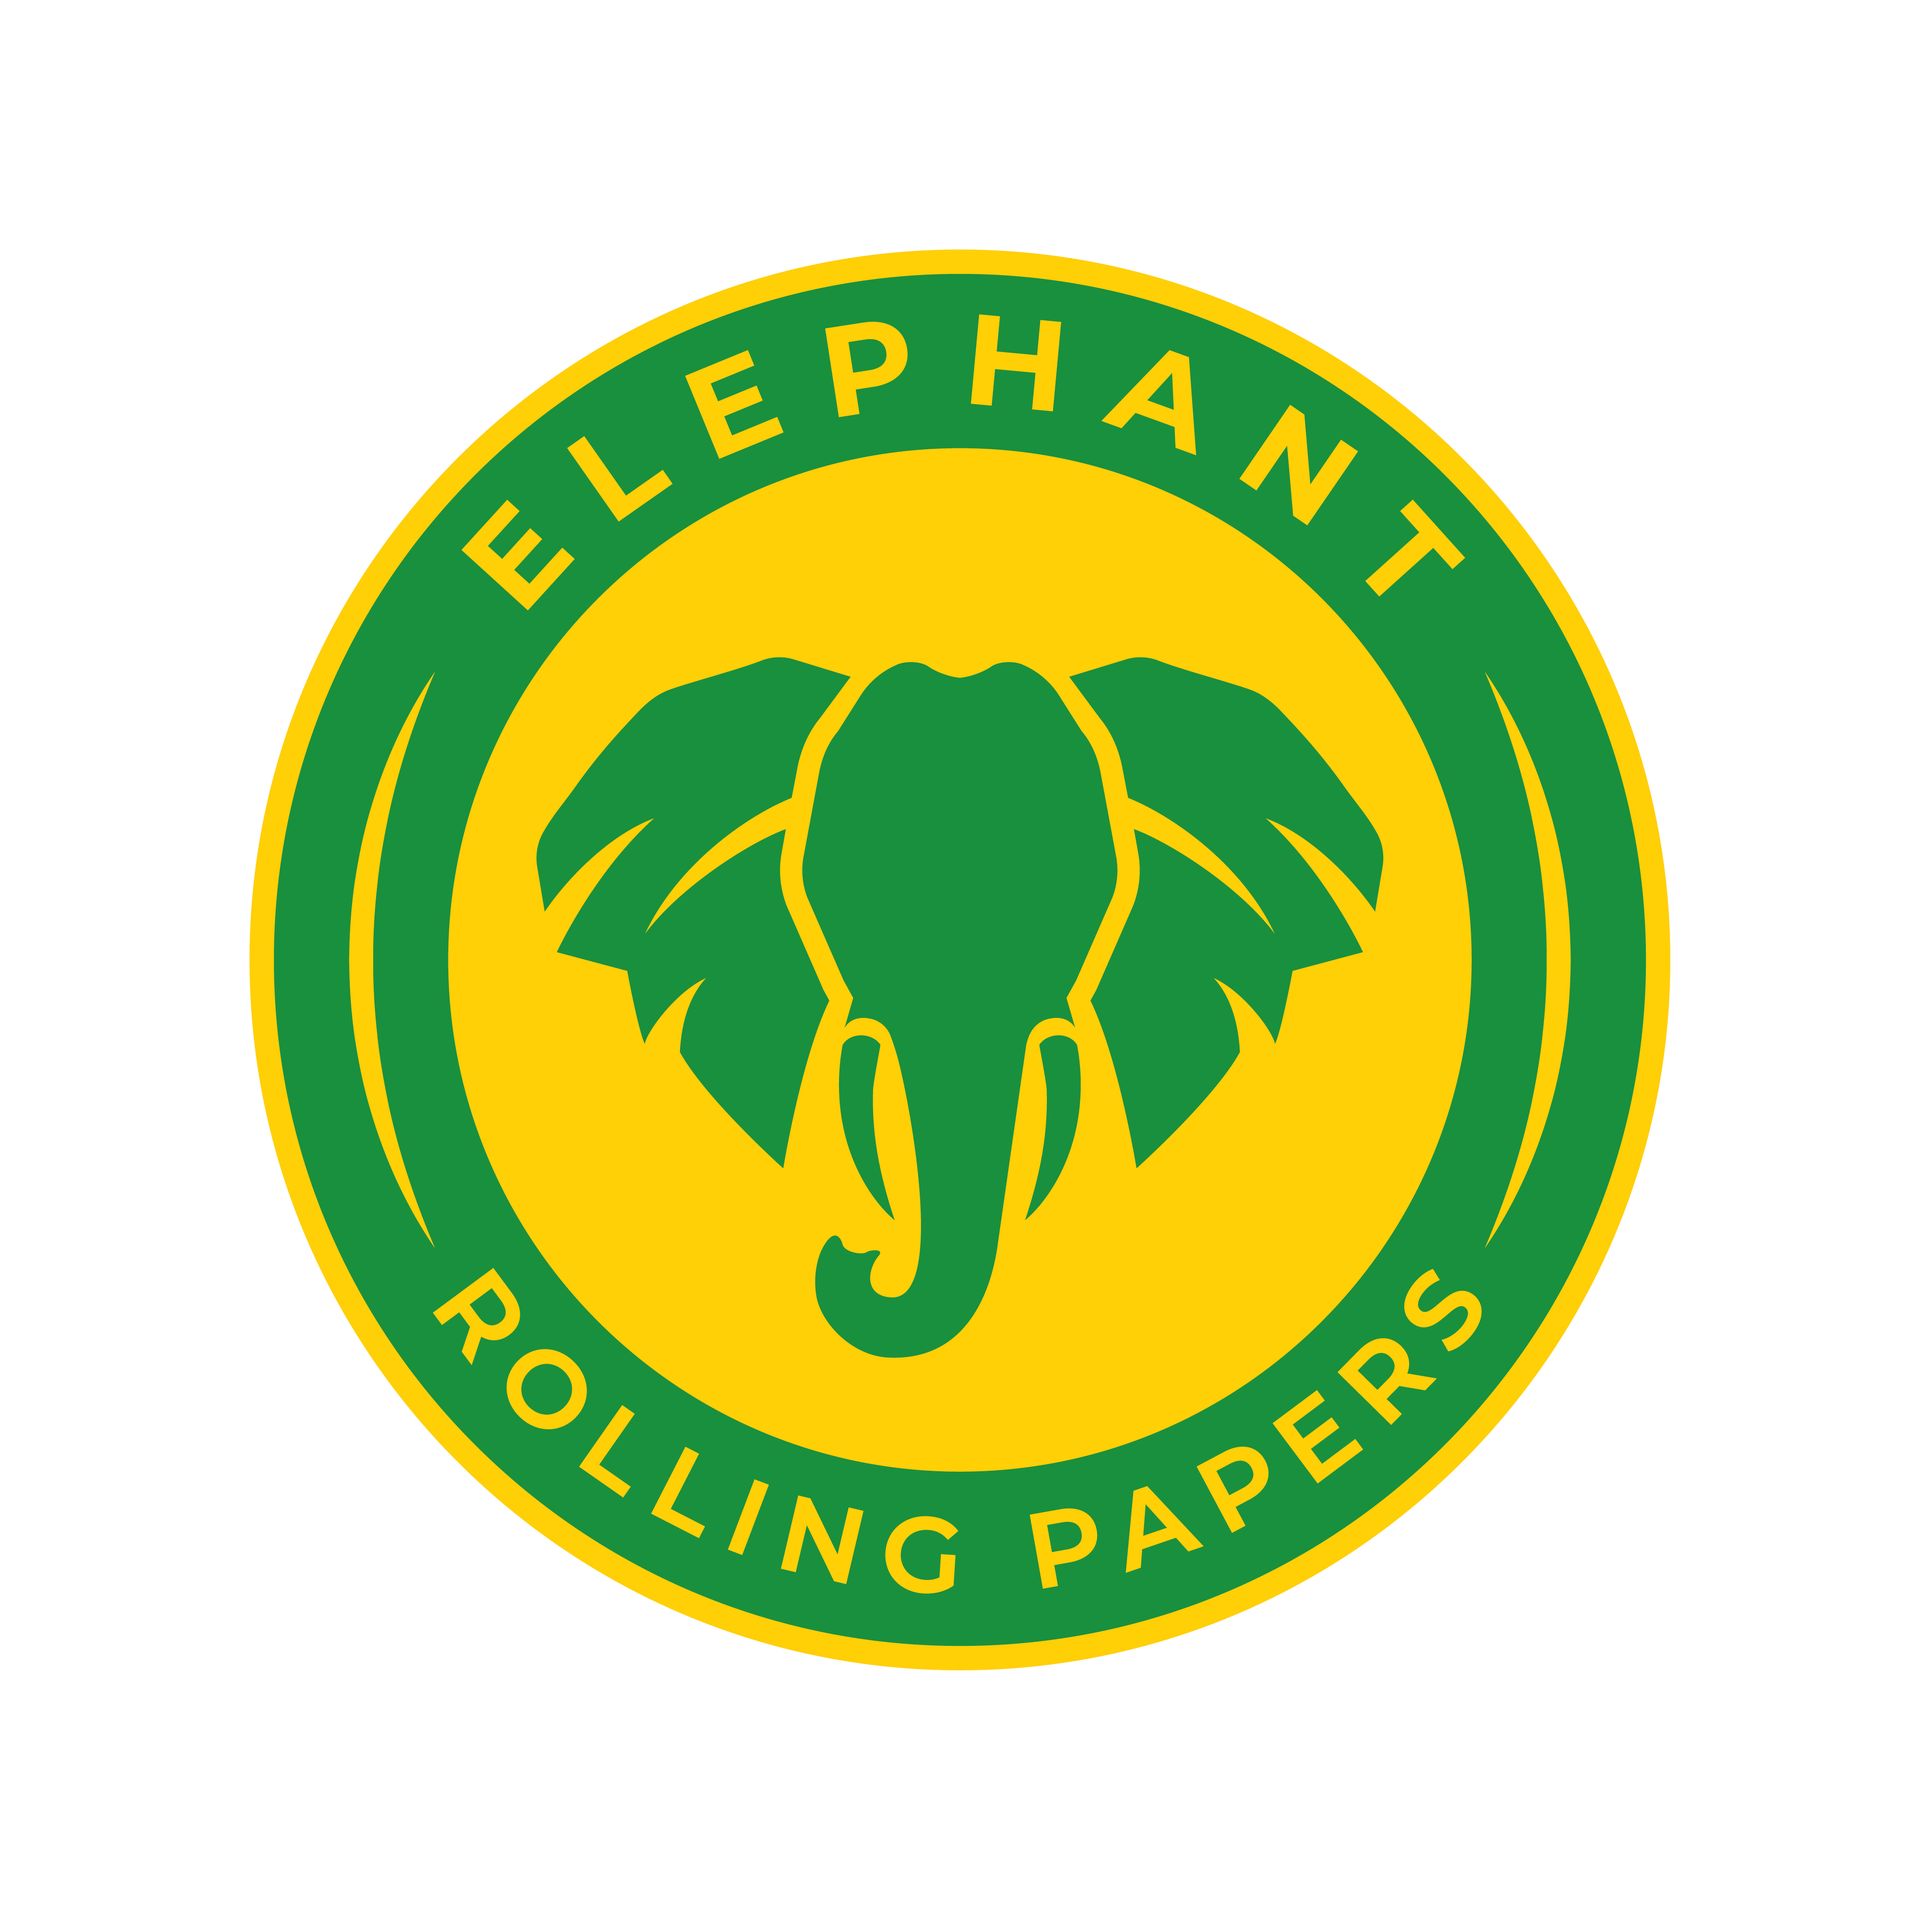 Elephant Rolling Papers